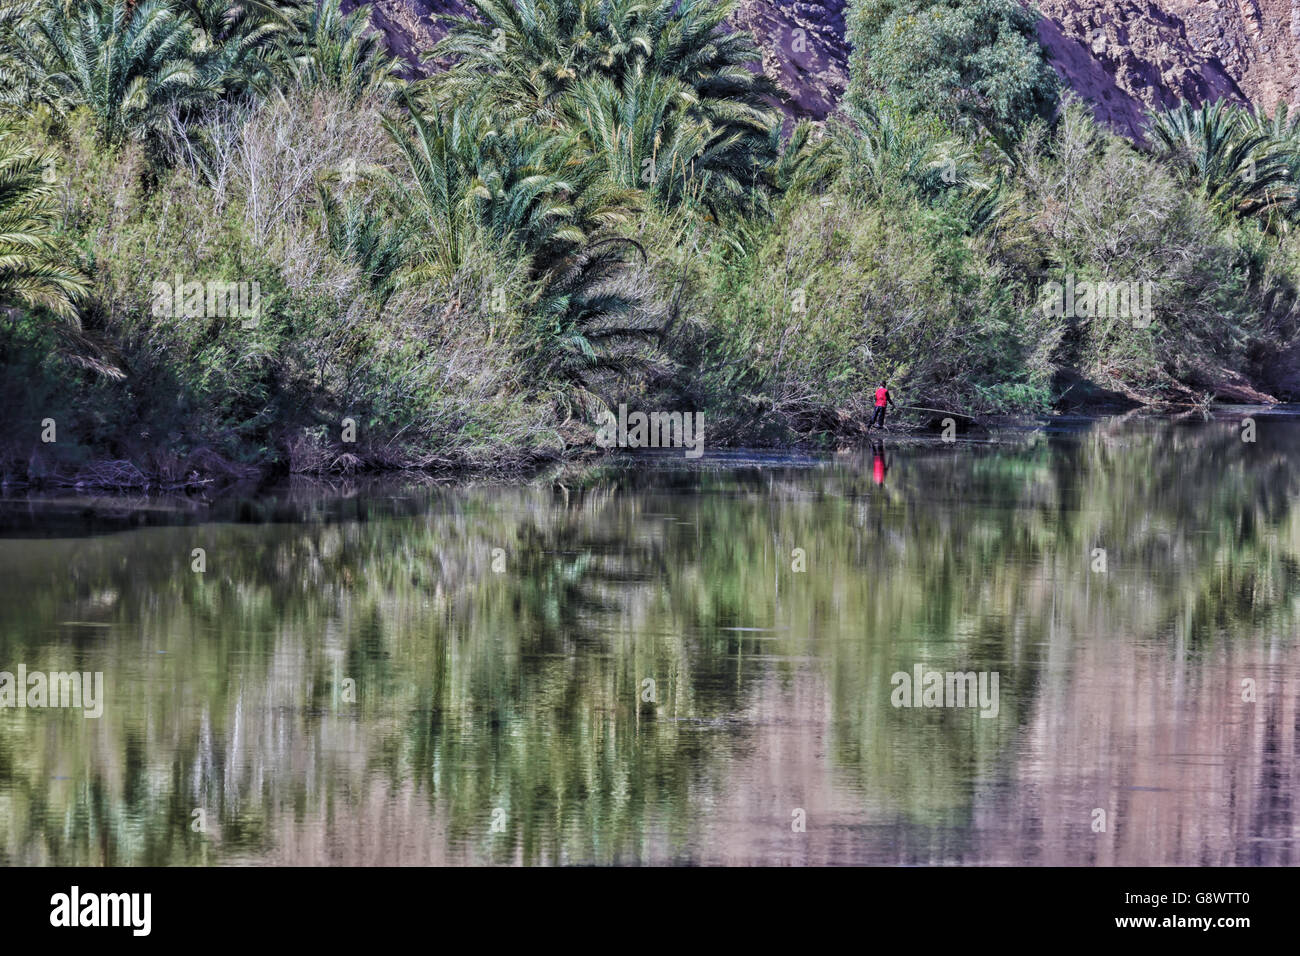 Palms and trees along a river, with reflections in the water. Stock Photo